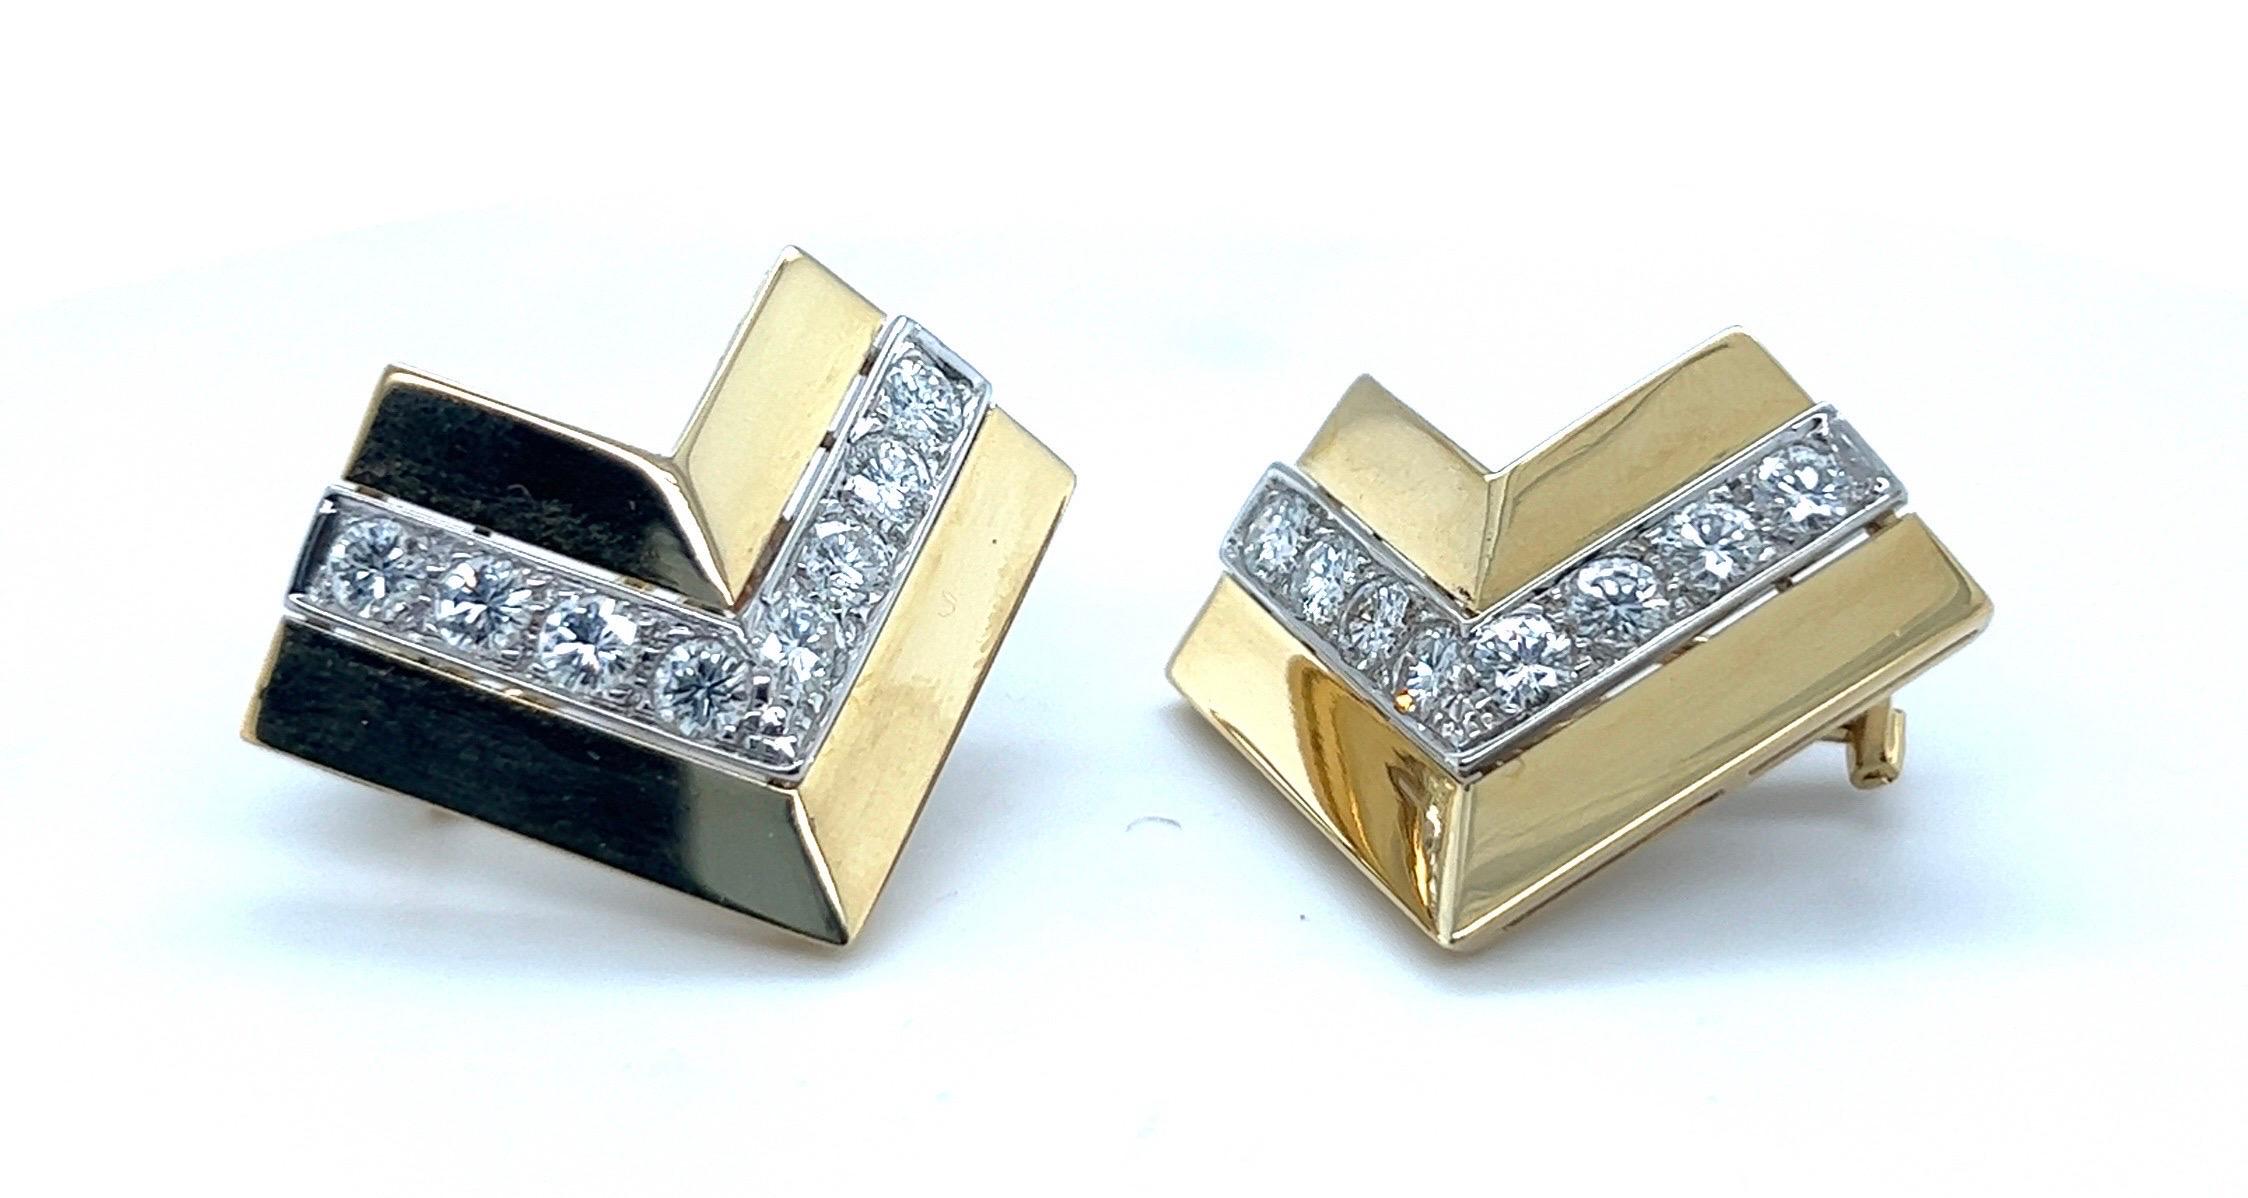 Attractive pair of 18 karat yellow and white gold and diamond ear clips. 

Eye-catching, v-shaped ear clips, the center line set with 8 brilliant-cut diamonds totalling circa 2.5 carats, flanked by two polished gold borders. The earrings are